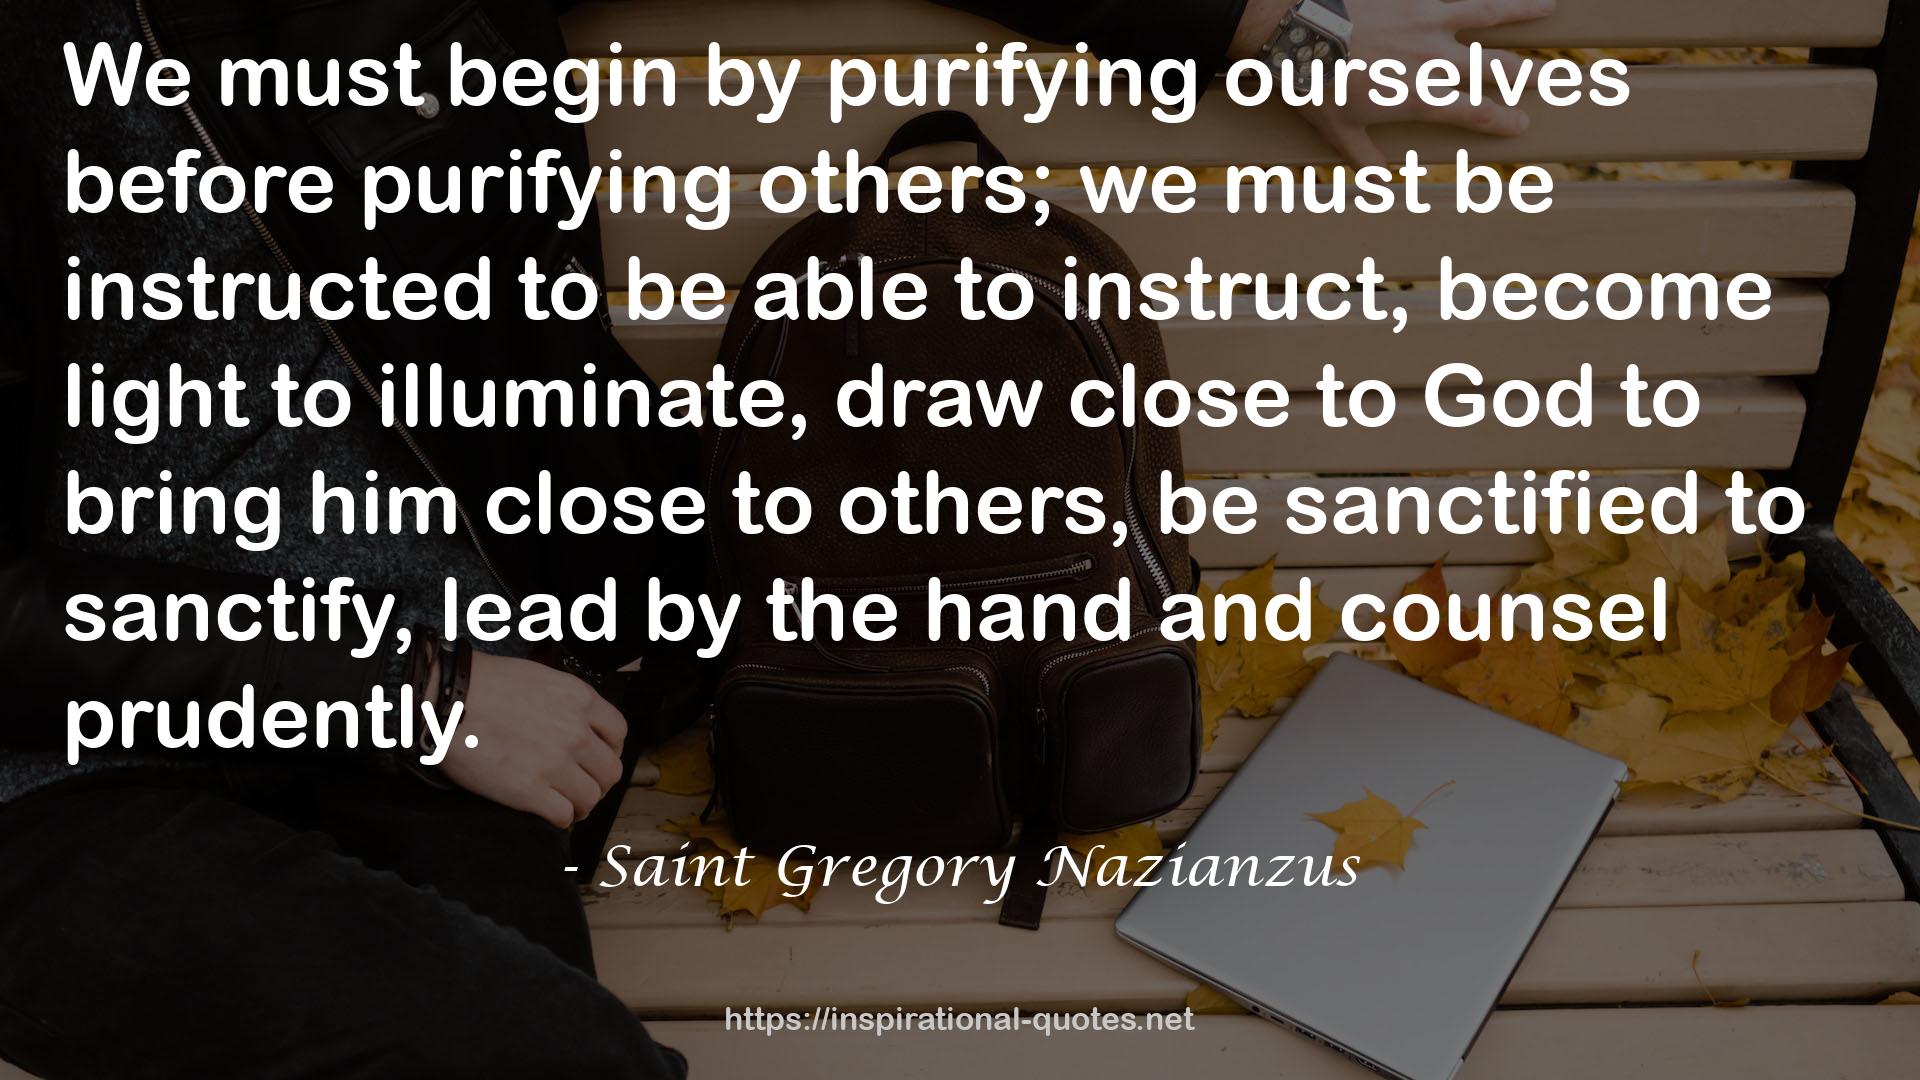 Saint Gregory Nazianzus QUOTES